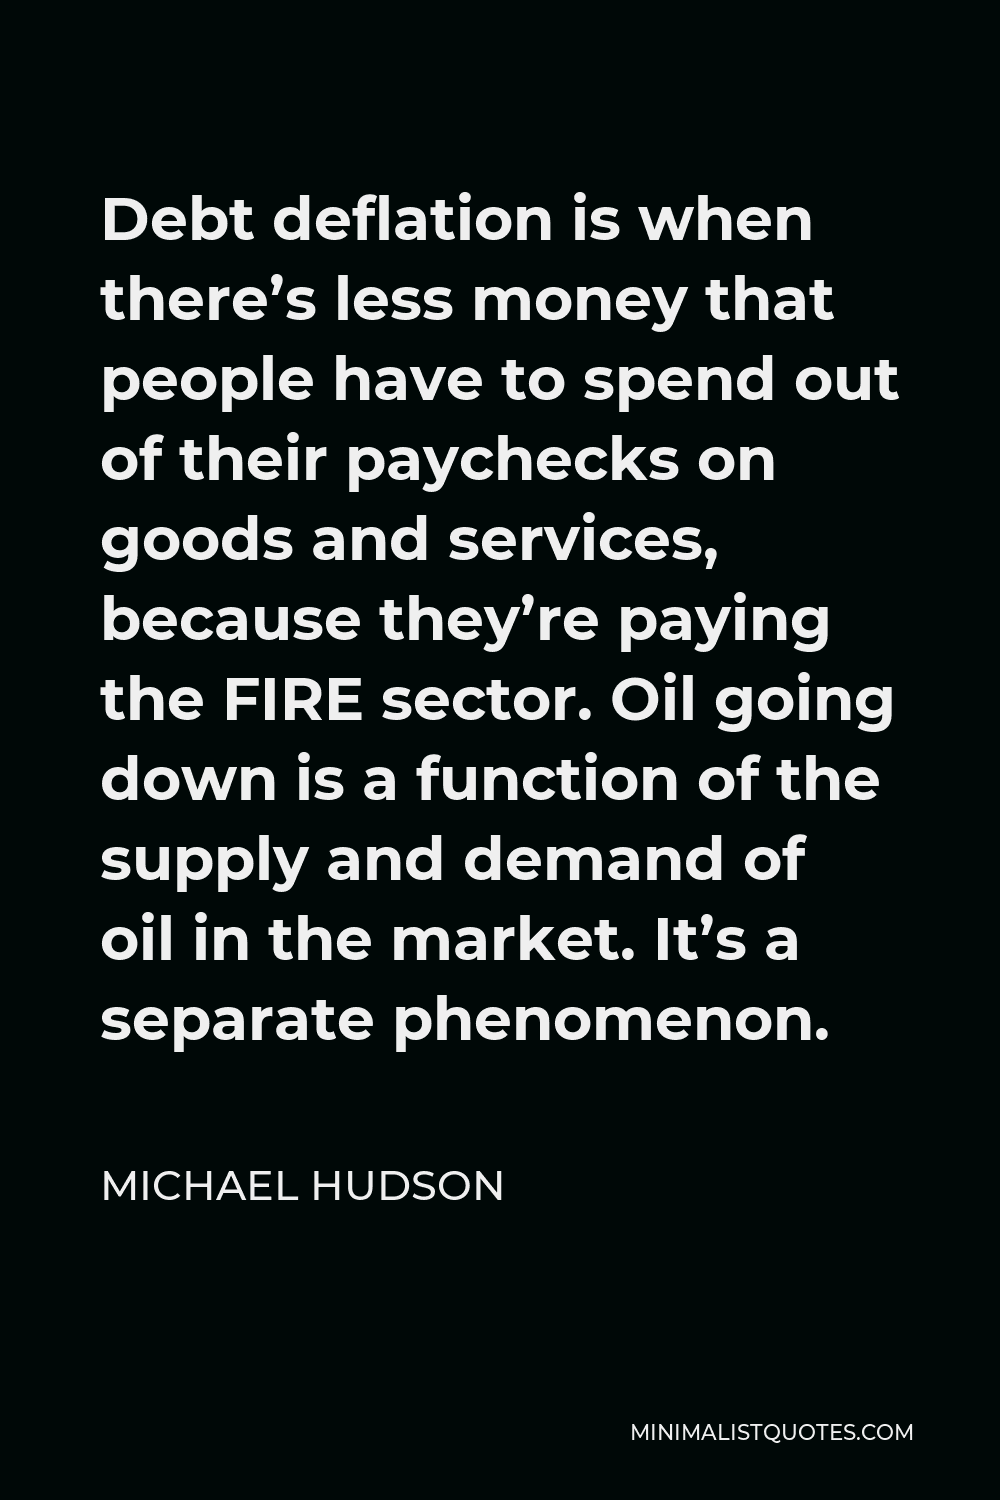 Michael Hudson Quote - Debt deflation is when there’s less money that people have to spend out of their paychecks on goods and services, because they’re paying the FIRE sector. Oil going down is a function of the supply and demand of oil in the market. It’s a separate phenomenon.